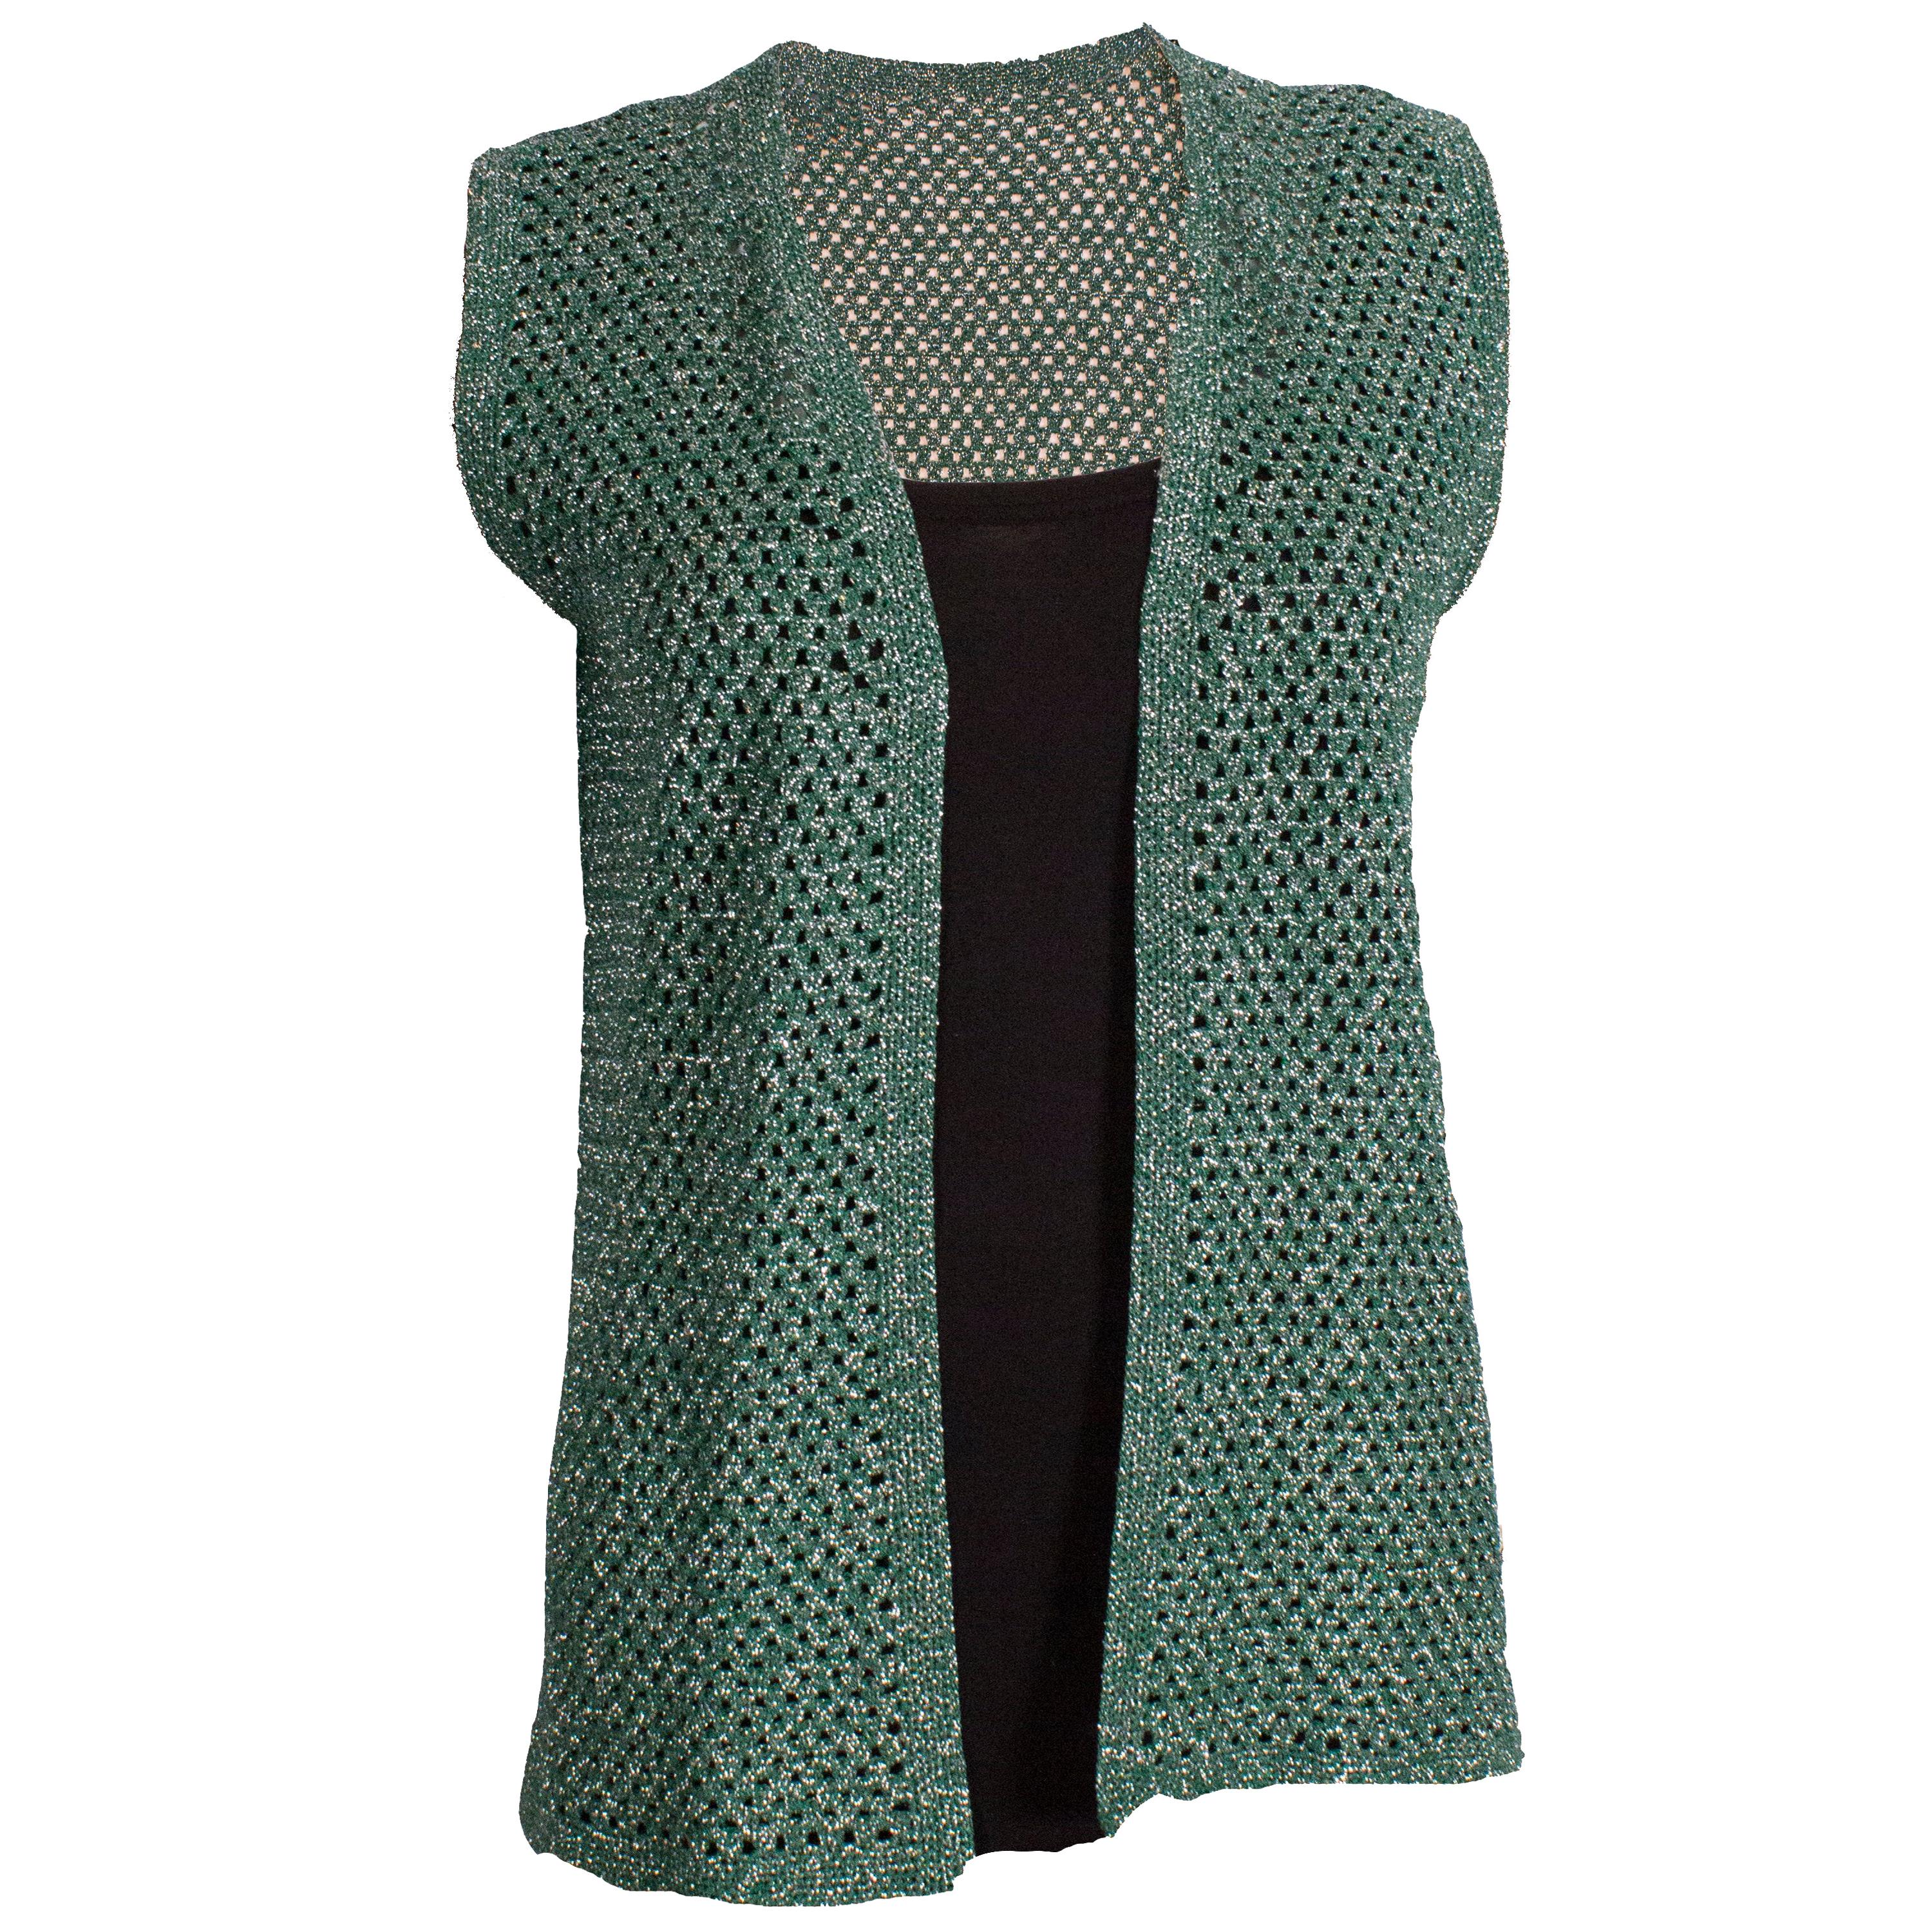  Vintage Green and Silver Crochet Gilet